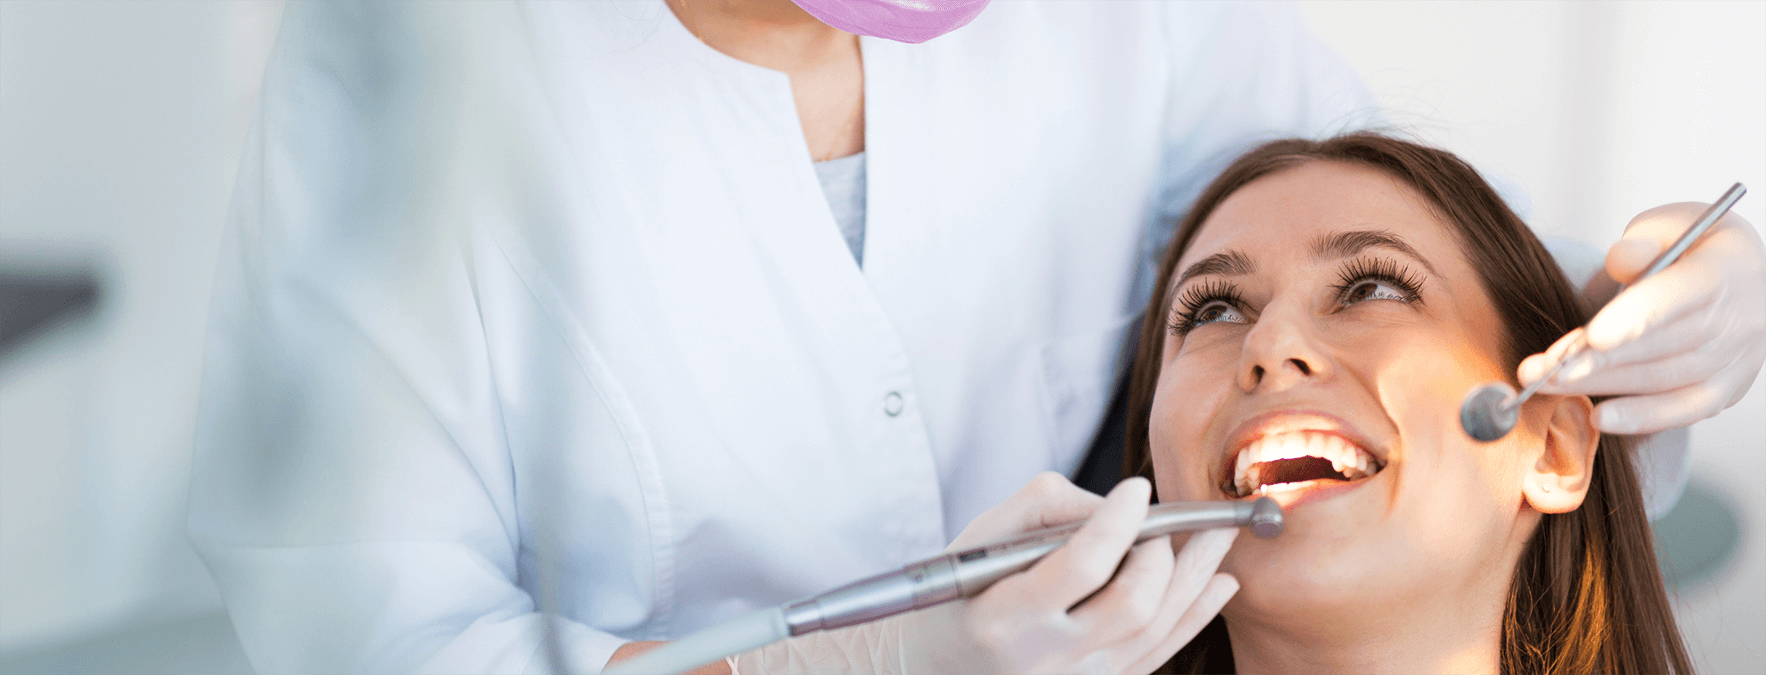 5 questions to ask yourself before choosing your dental specialty